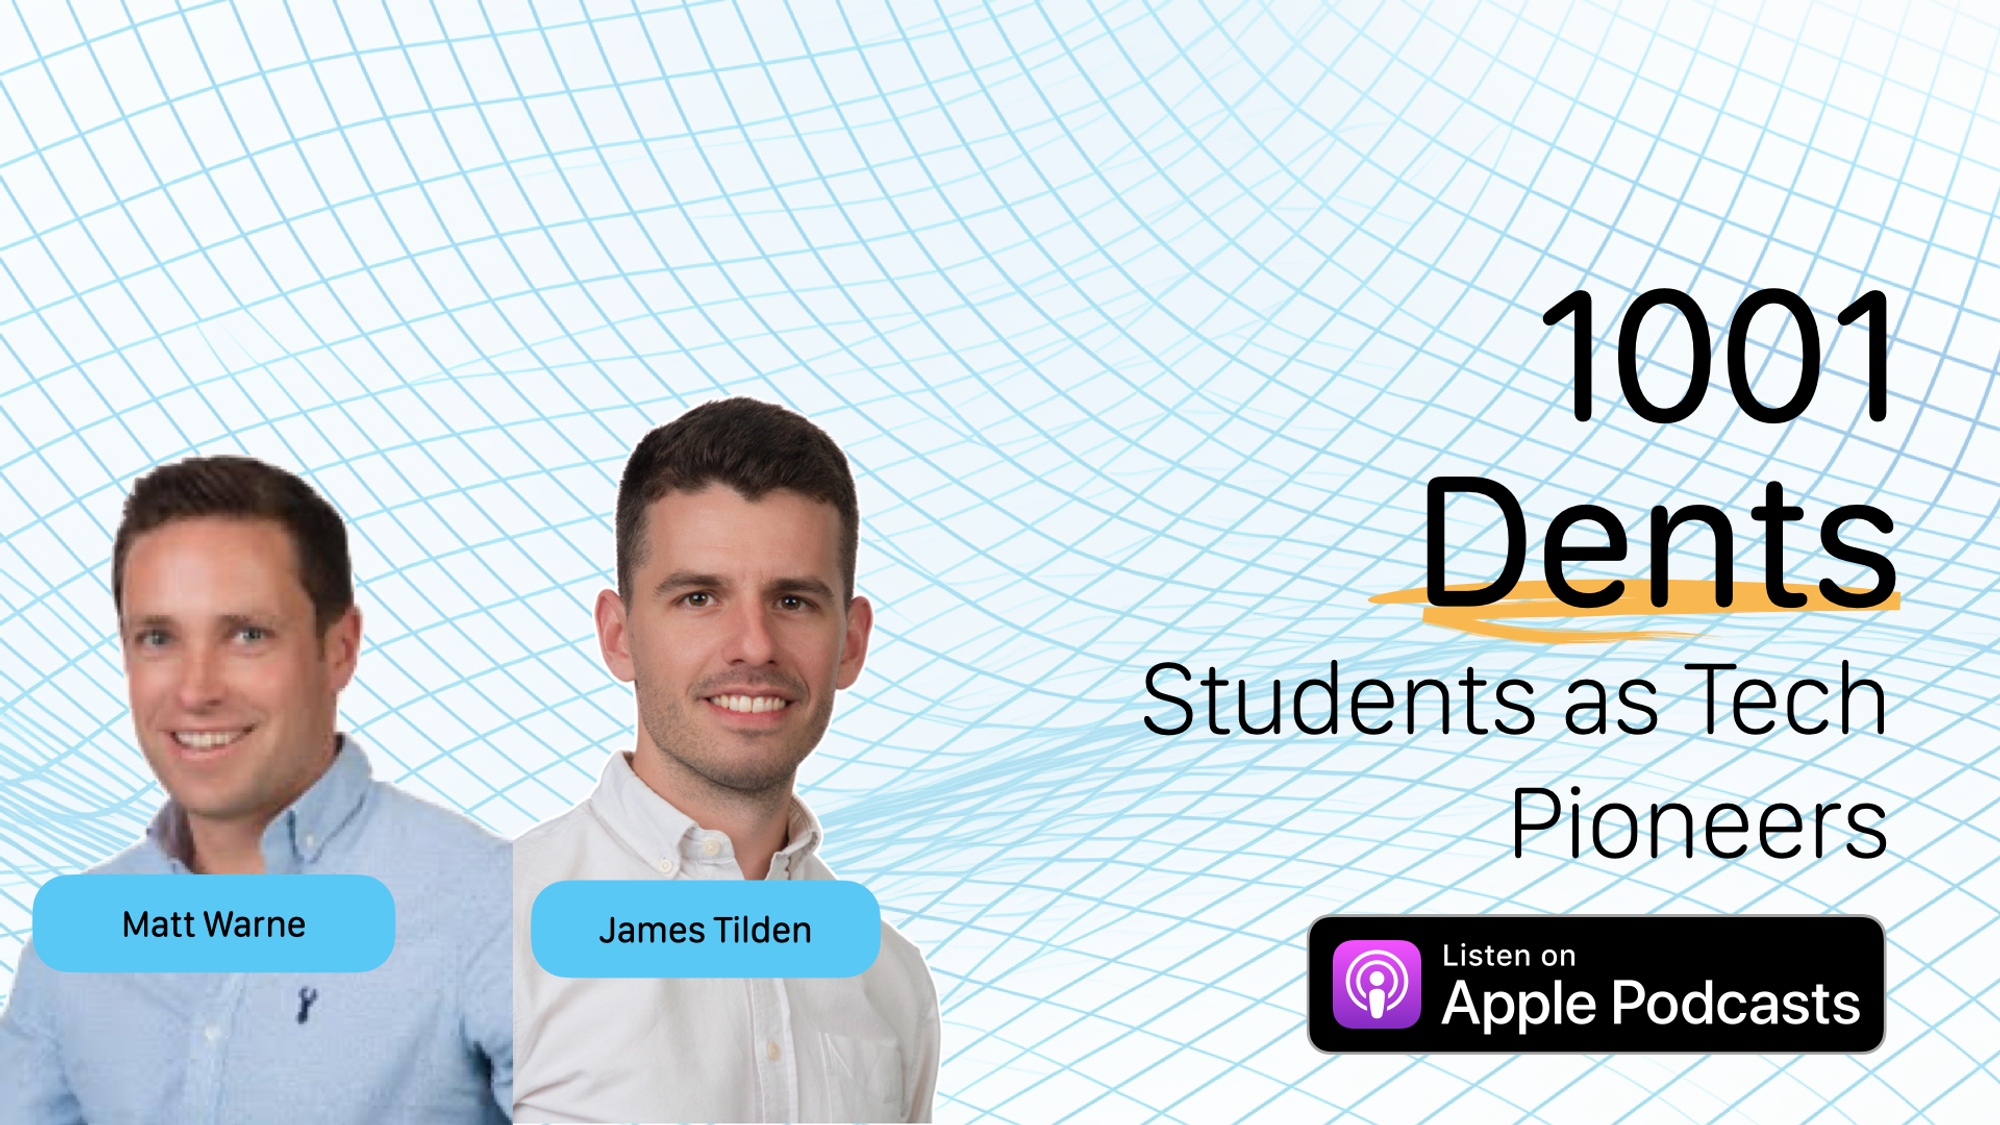 1001 Dents podcast flyer with headshot photos of Matt Warne and James Tilden, and episode title, Students as Tech Pioneers.